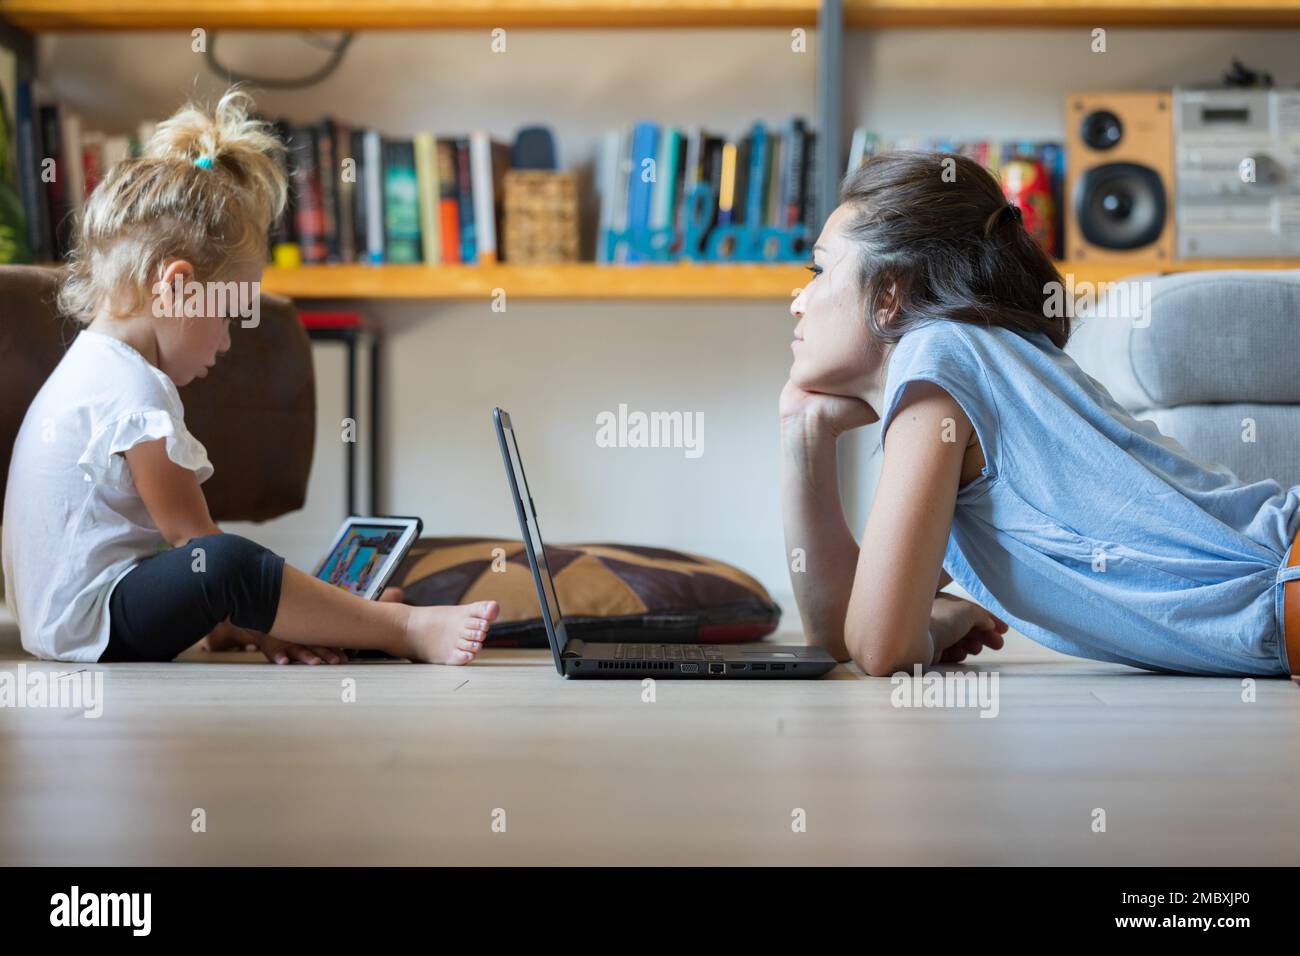 The mother carefully observes her child using a digital tablet. She supports and accompanies her in her growth. She uses the laptop and they stand tog Stock Photo